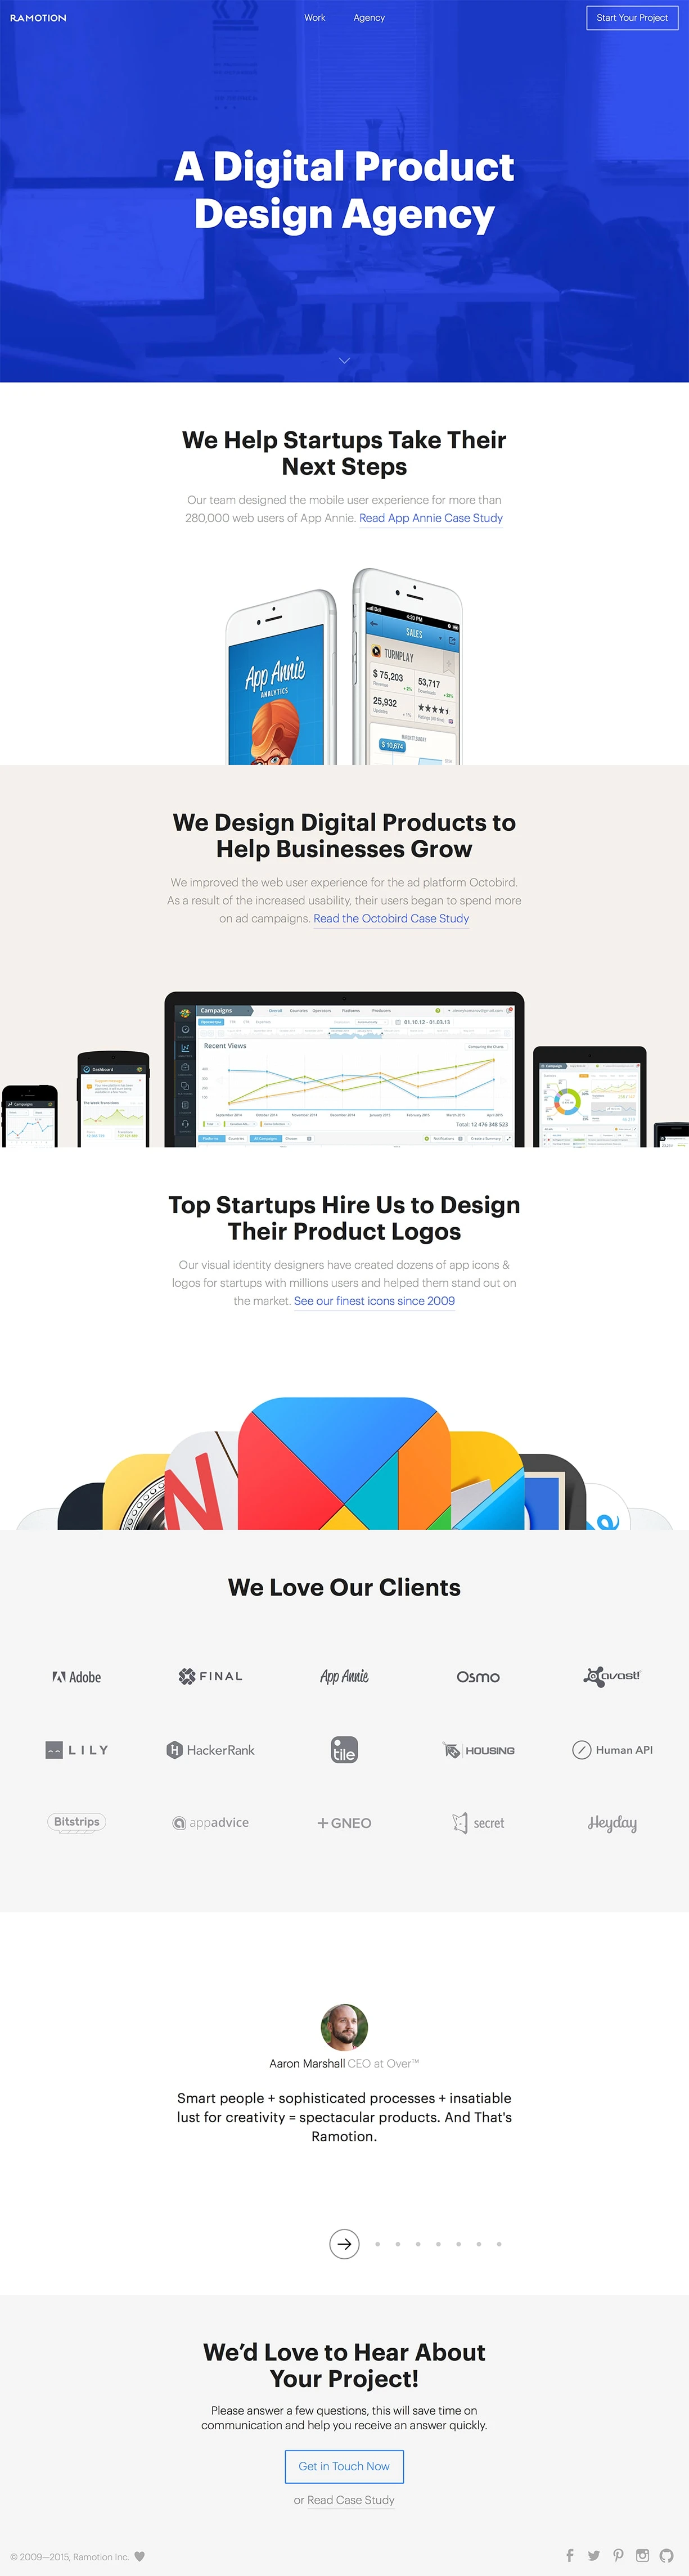 Ramotion Landing Page Example: Ramotion is a digital product design agency in San Francisco, specializing in brand identity, mobile and web. We make product logos, app user interfaces and websites for startups and businesses.